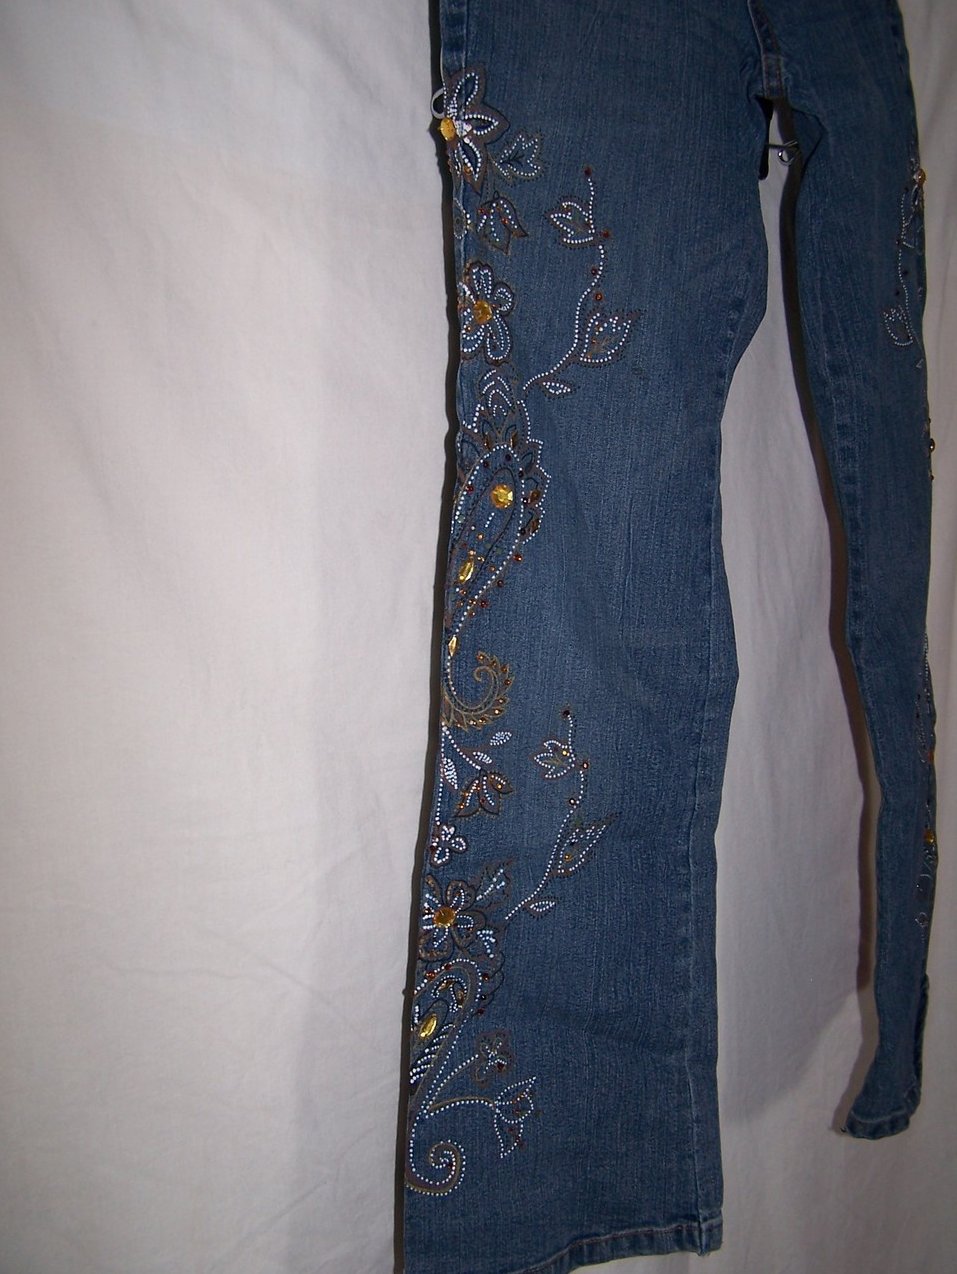 Image 3 of Decorated Jeans, Jrs Sz 8P, Distressed